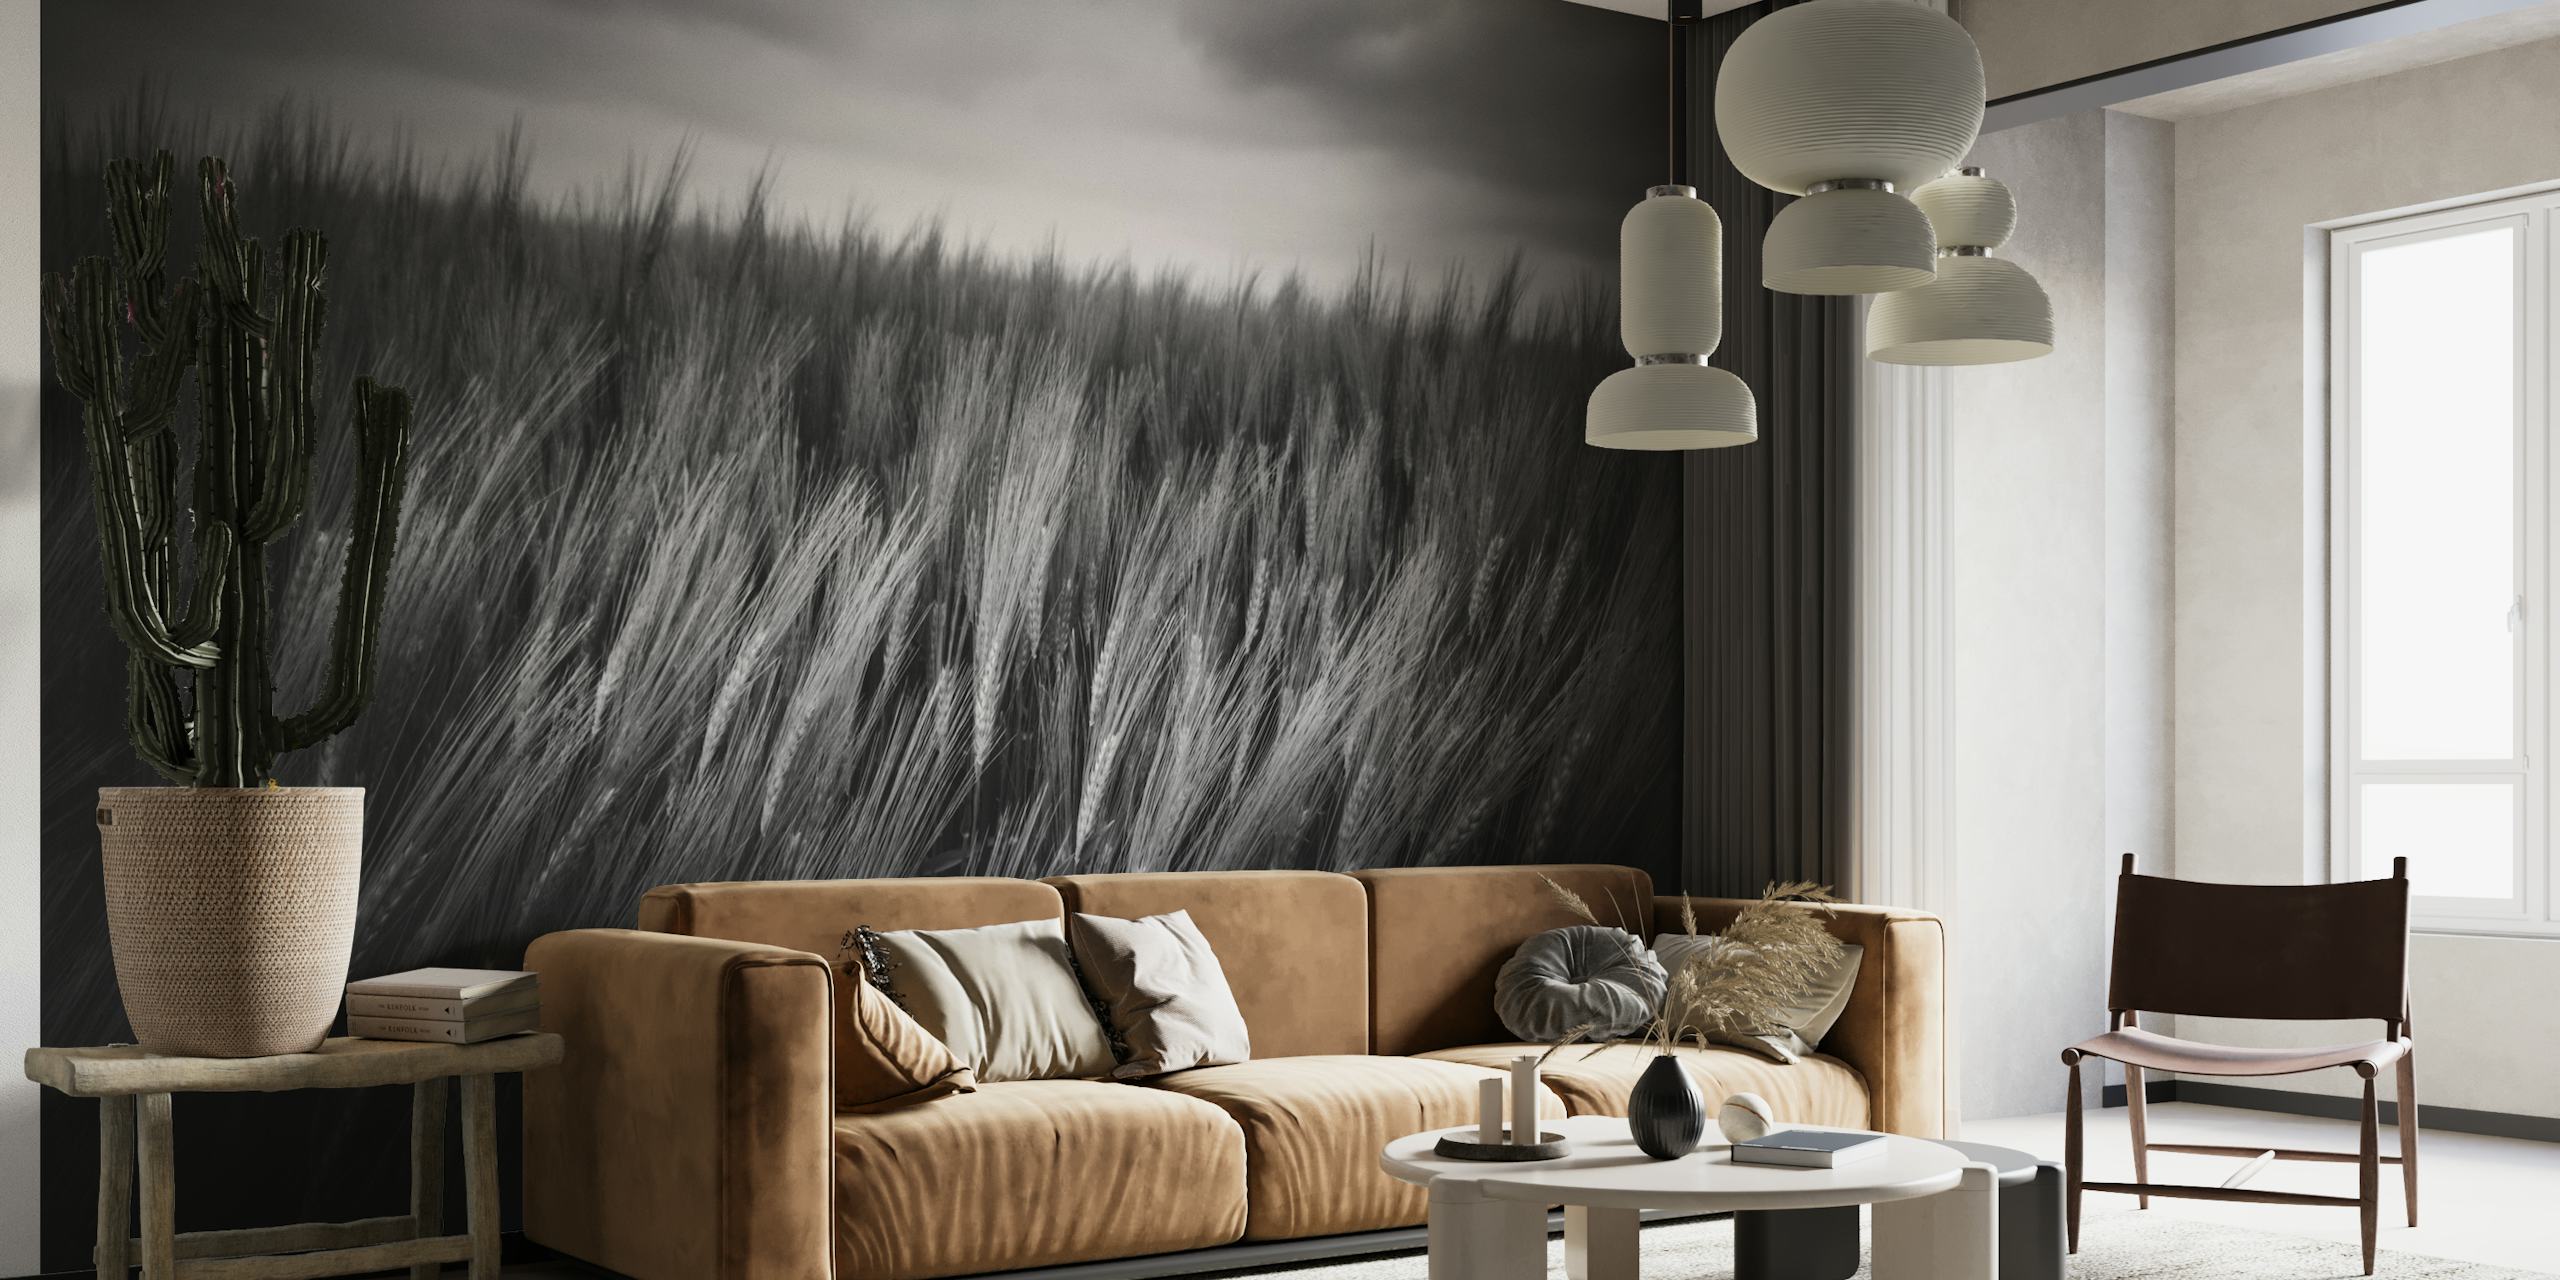 Monochrome wall mural of tall grass swaying in the wind